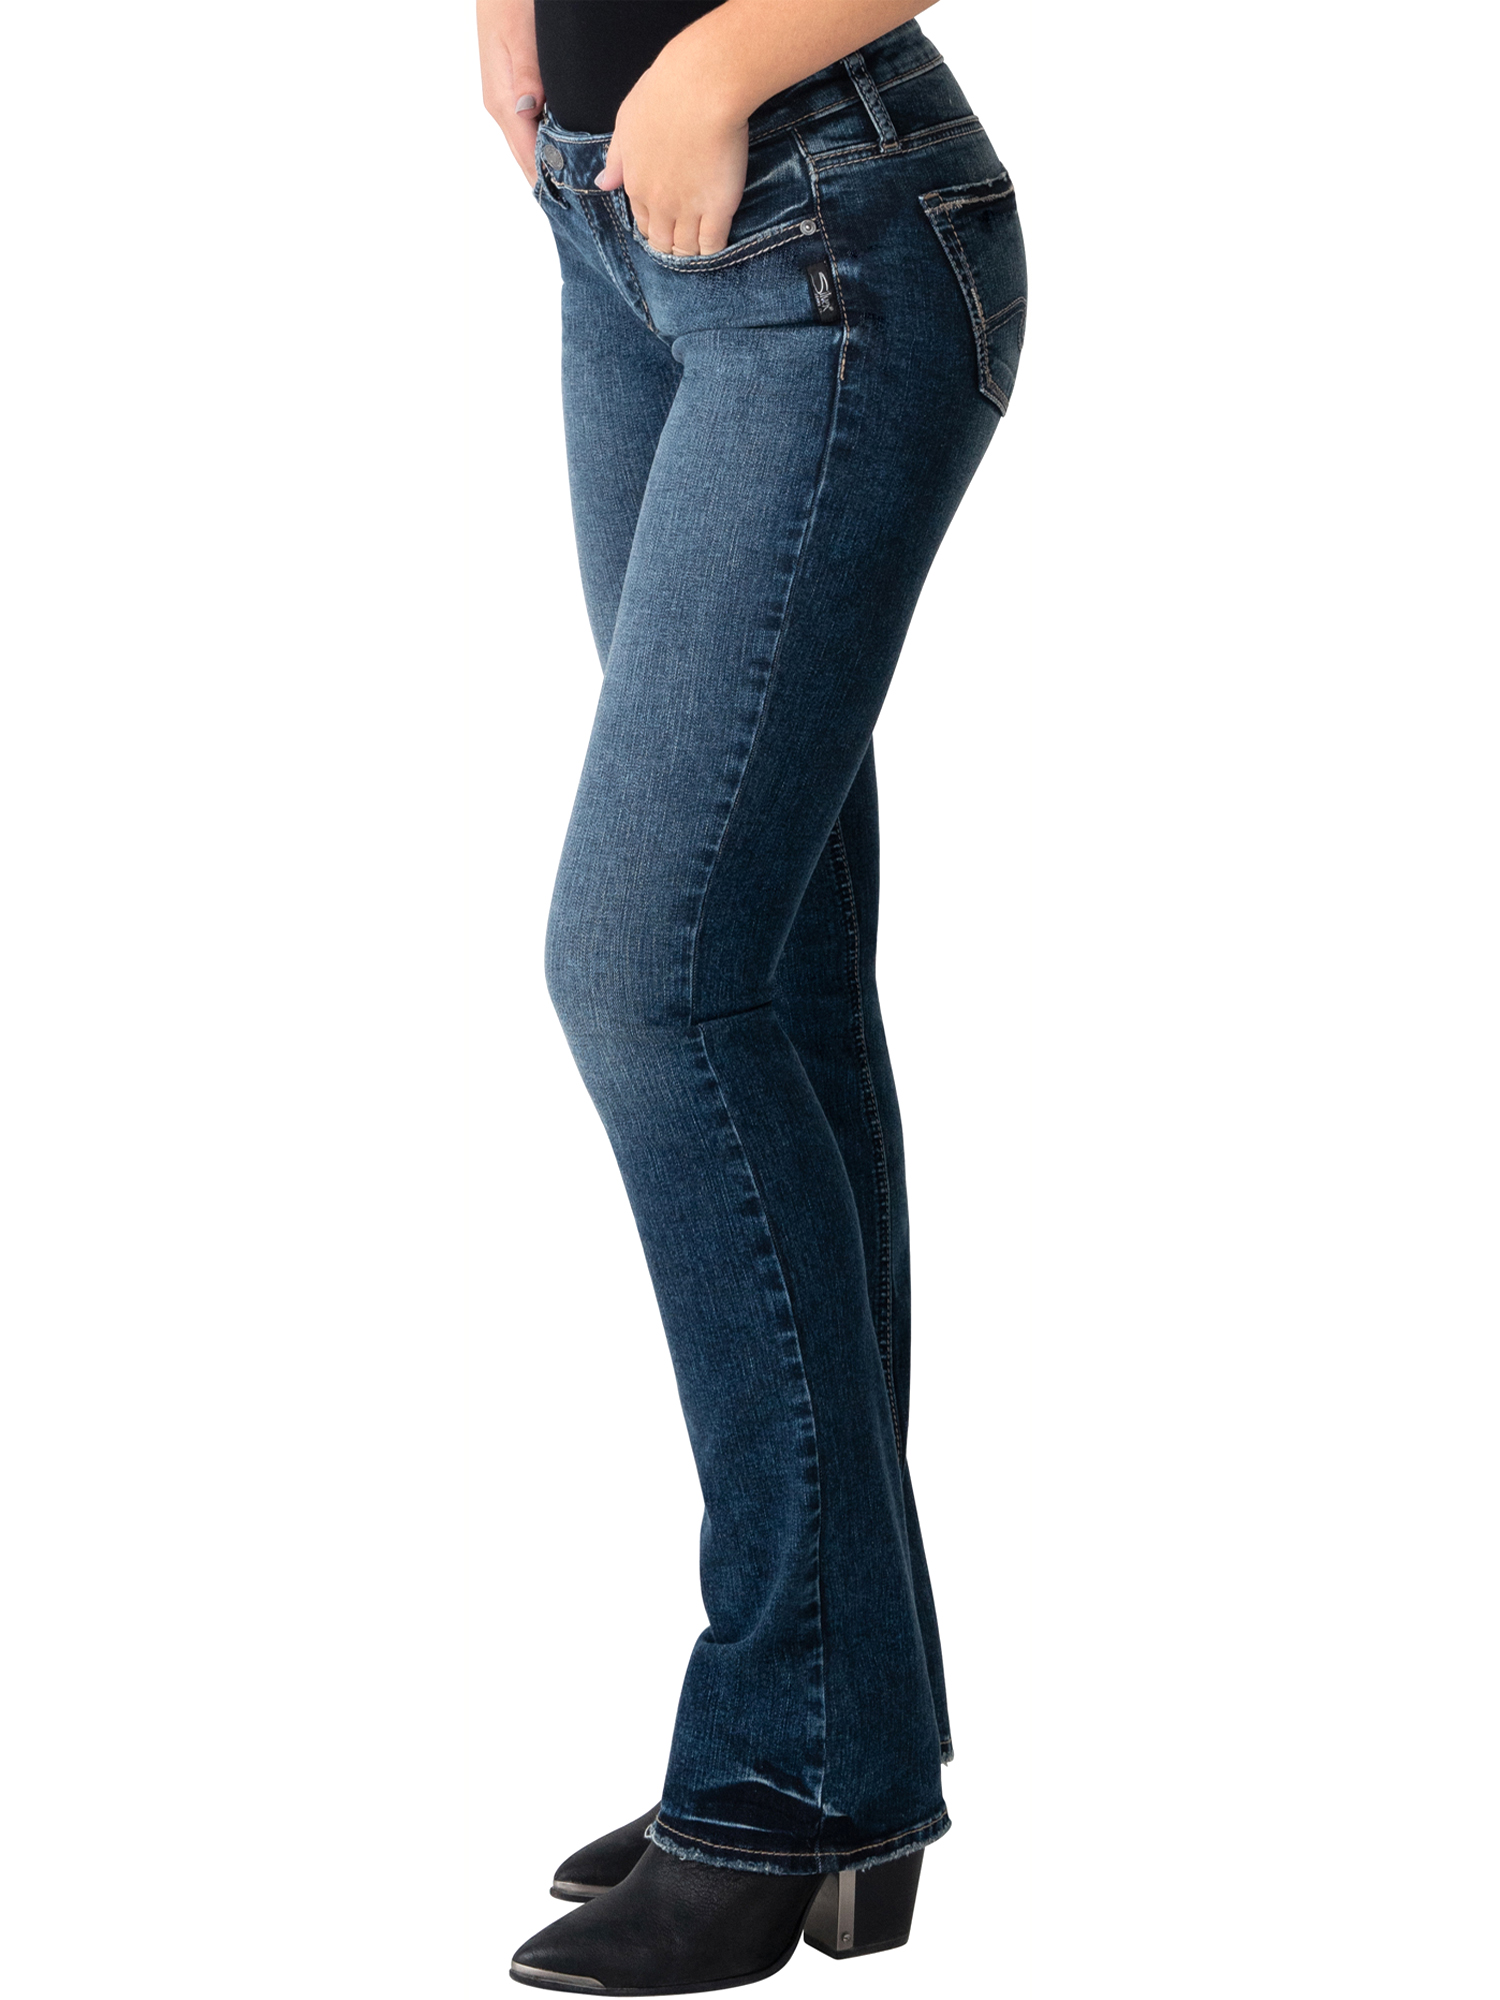 Silver Jeans Co. Women's Tuesday Low Rise Slim Bootcut Jeans, Waist Sizes 24-36 - image 3 of 3